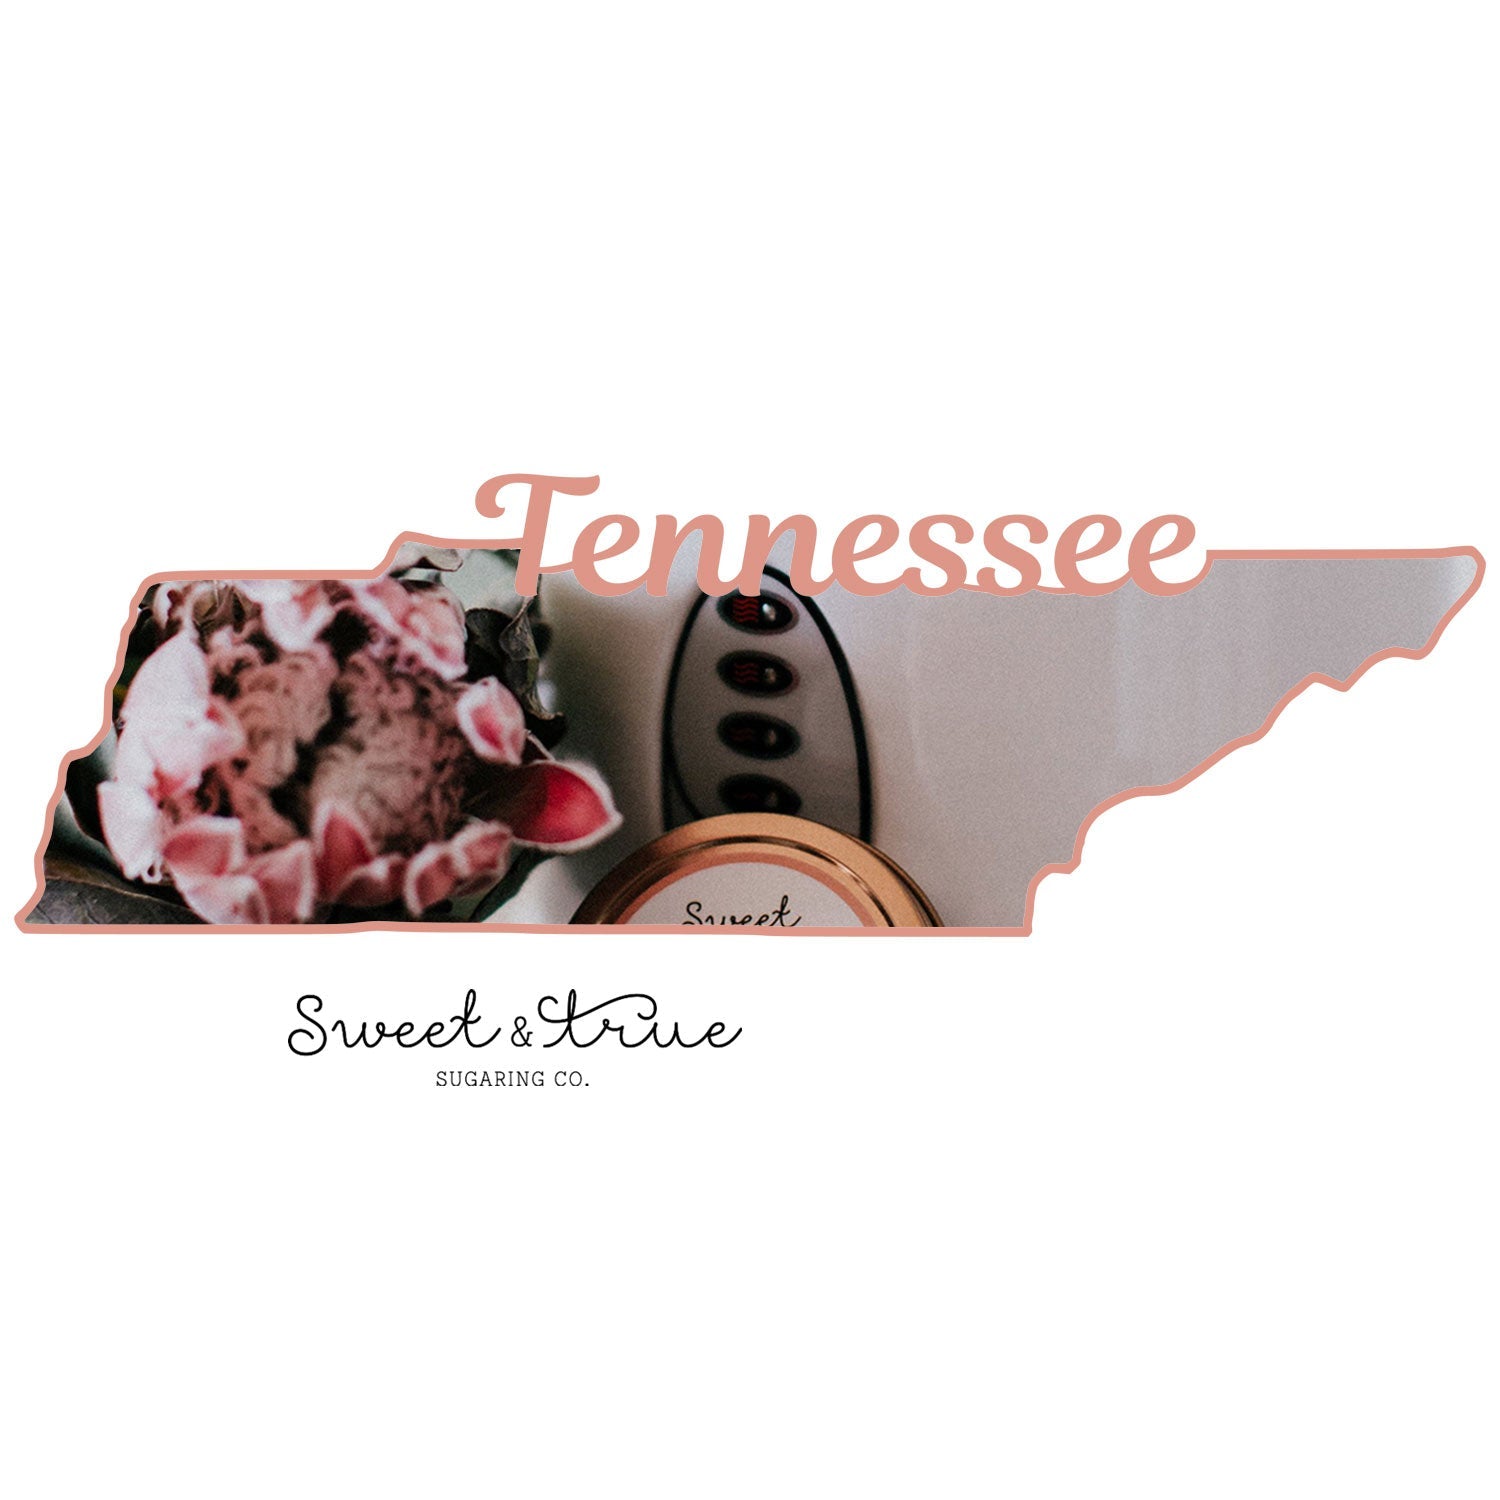 Nashville, Tennessee - Sugaring Certificate Courses